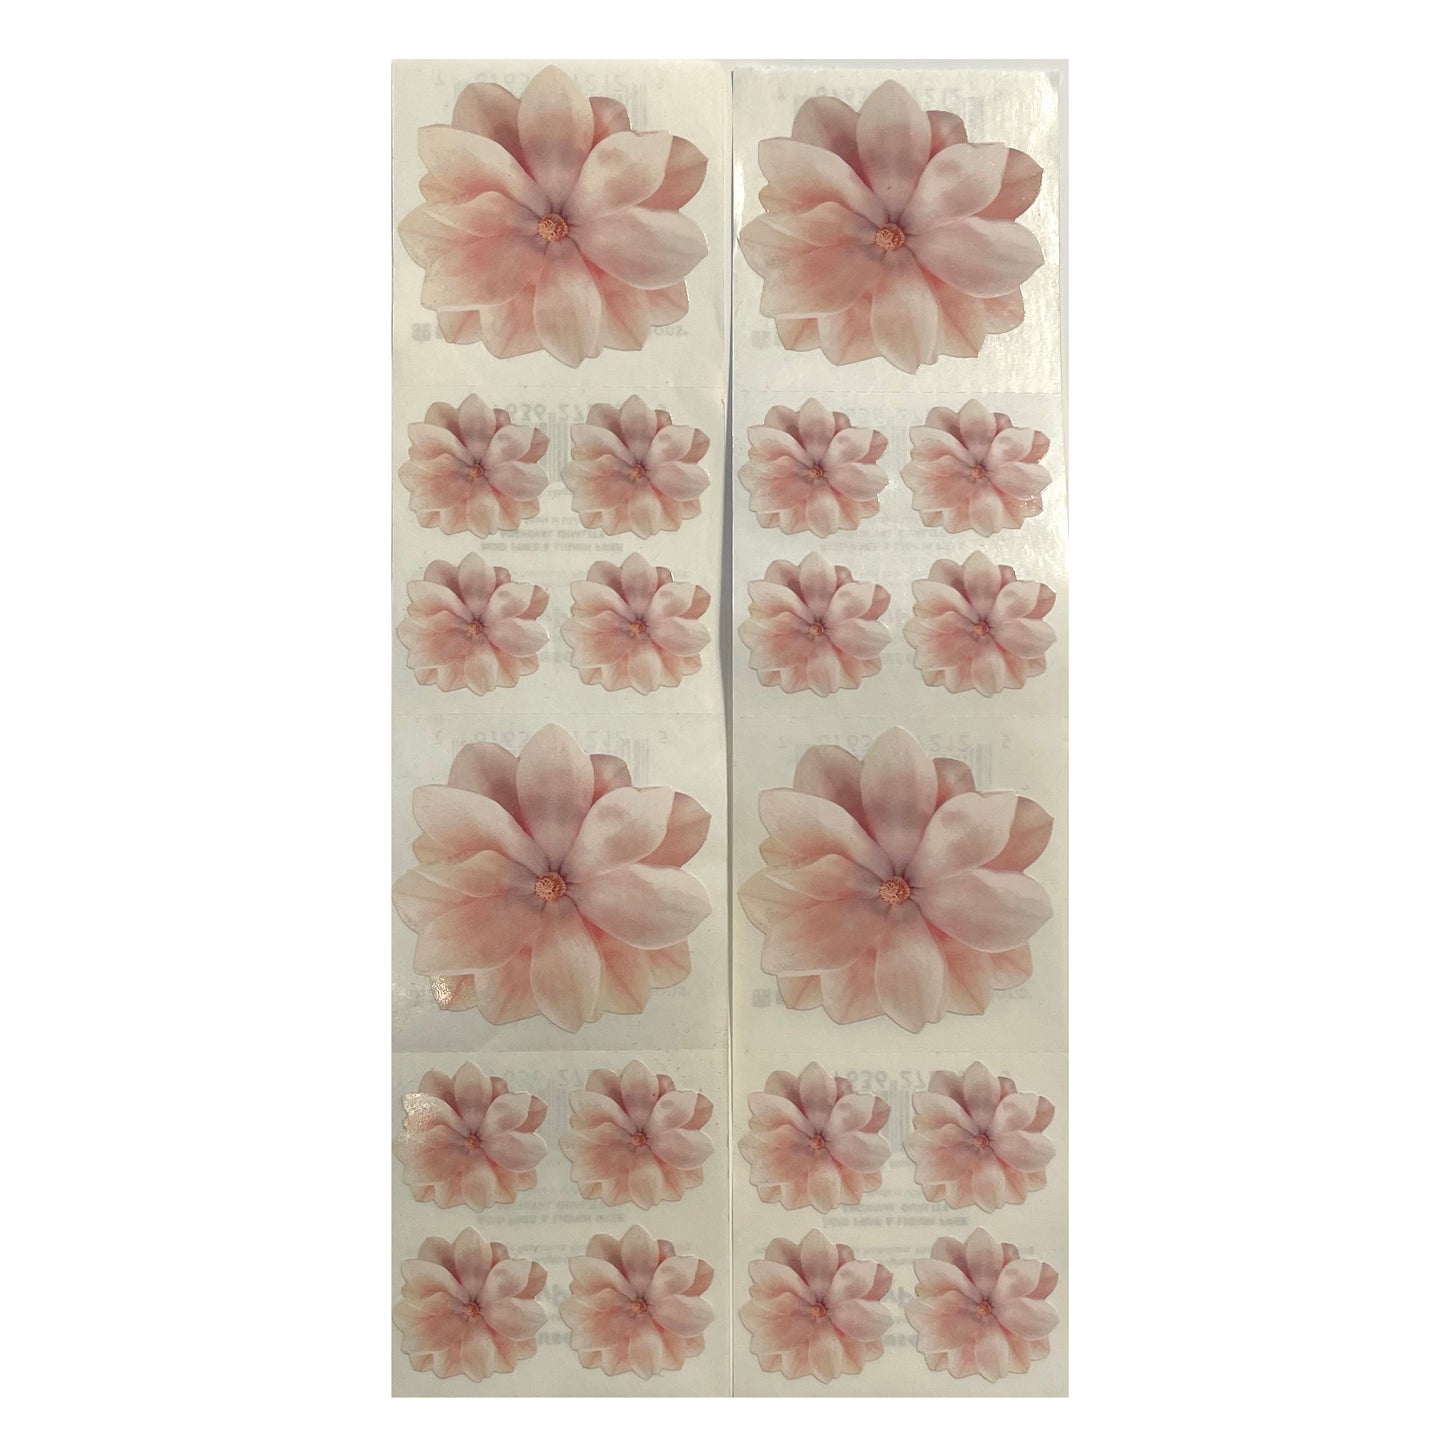 Paper House: Photoreal Pink Gardenia Flower stickers